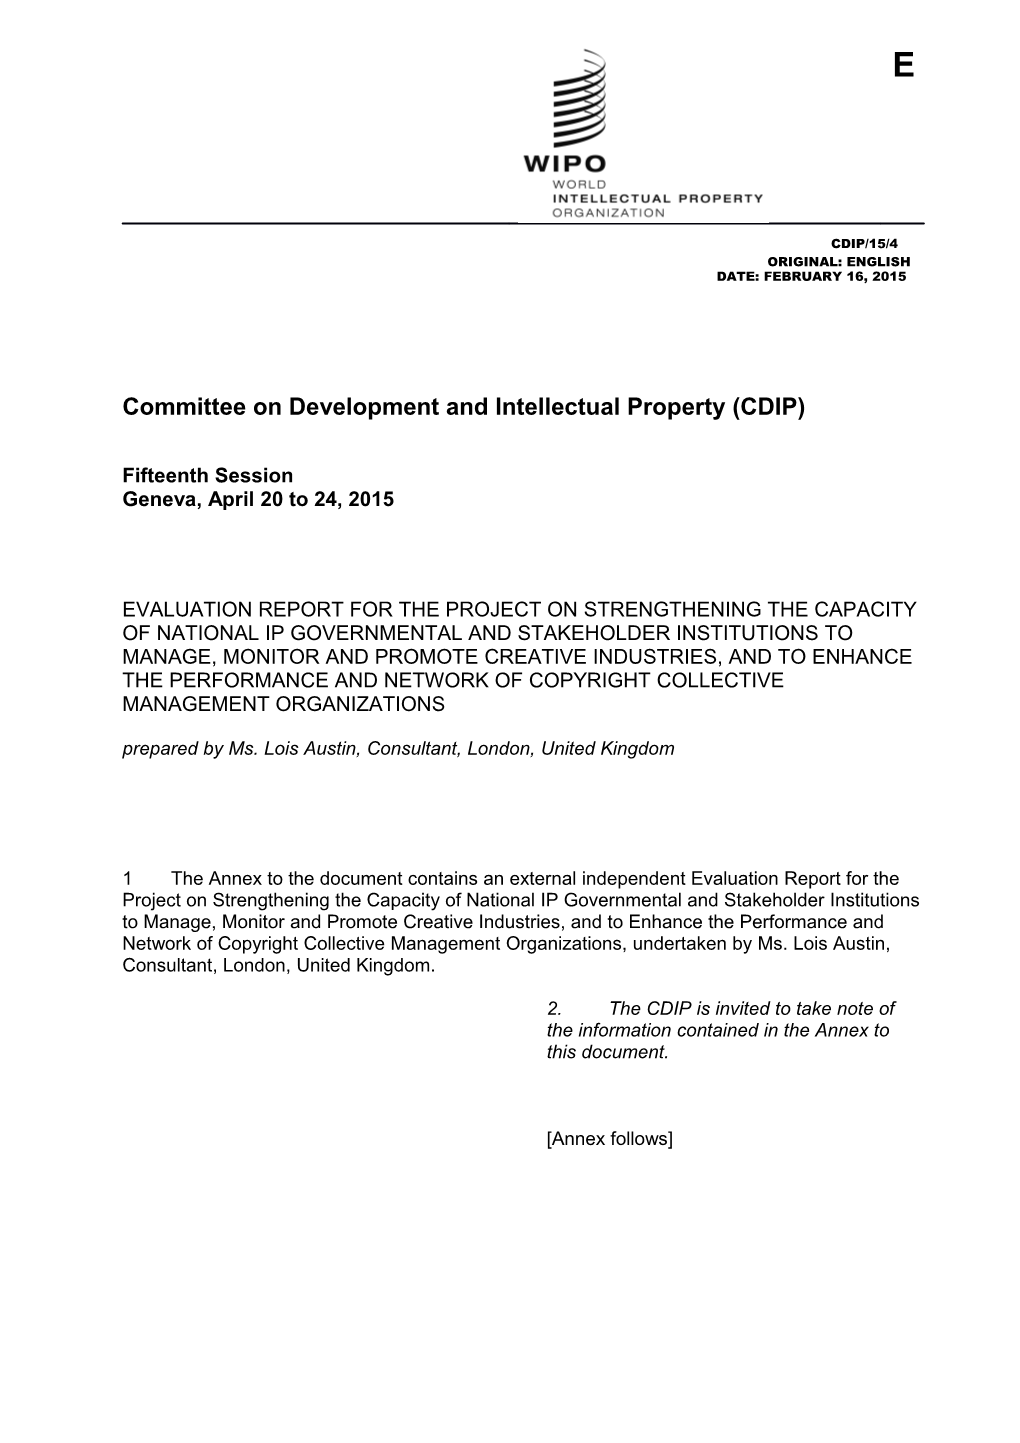 Committee on Development and Intellectual Property (CDIP) s7